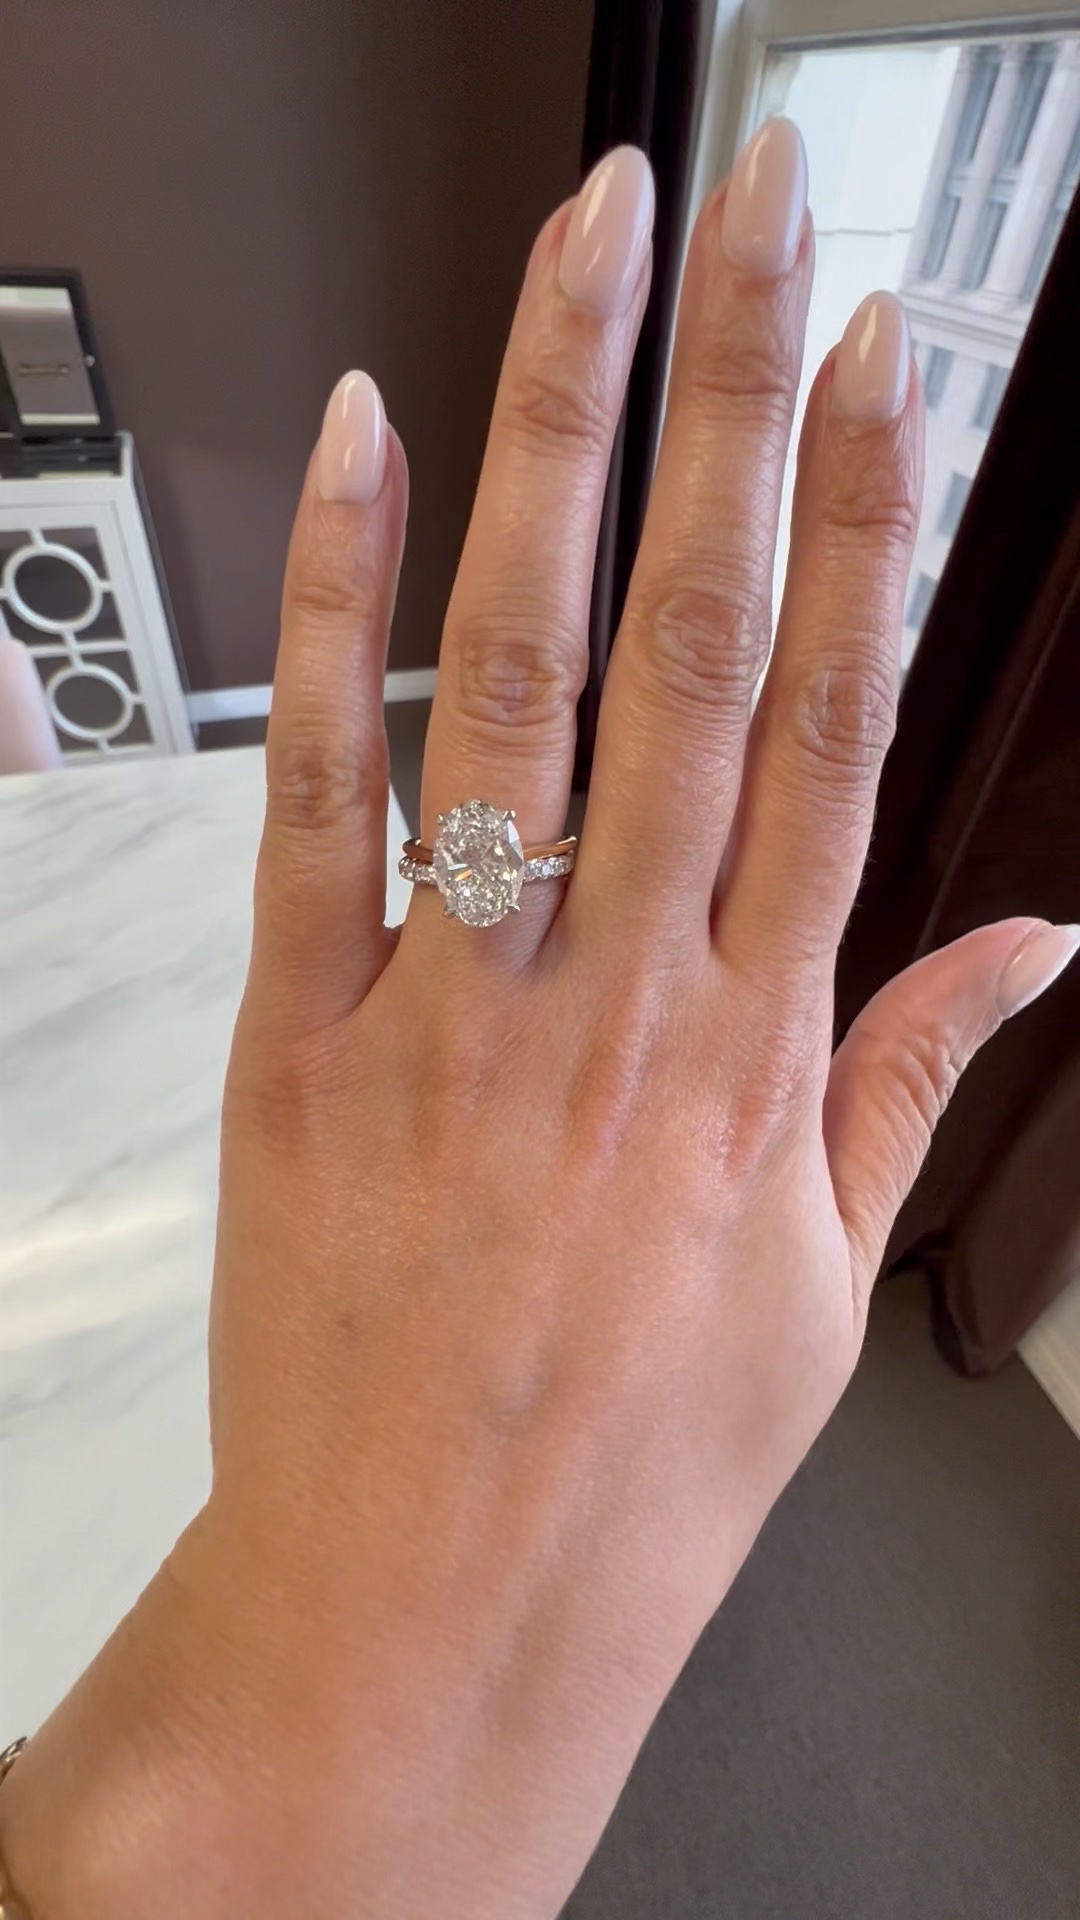 Custom Platinum Engagement Ring with Oval Diamond Halo | Exquisite Jewelry  for Every Occasion | FWCJ